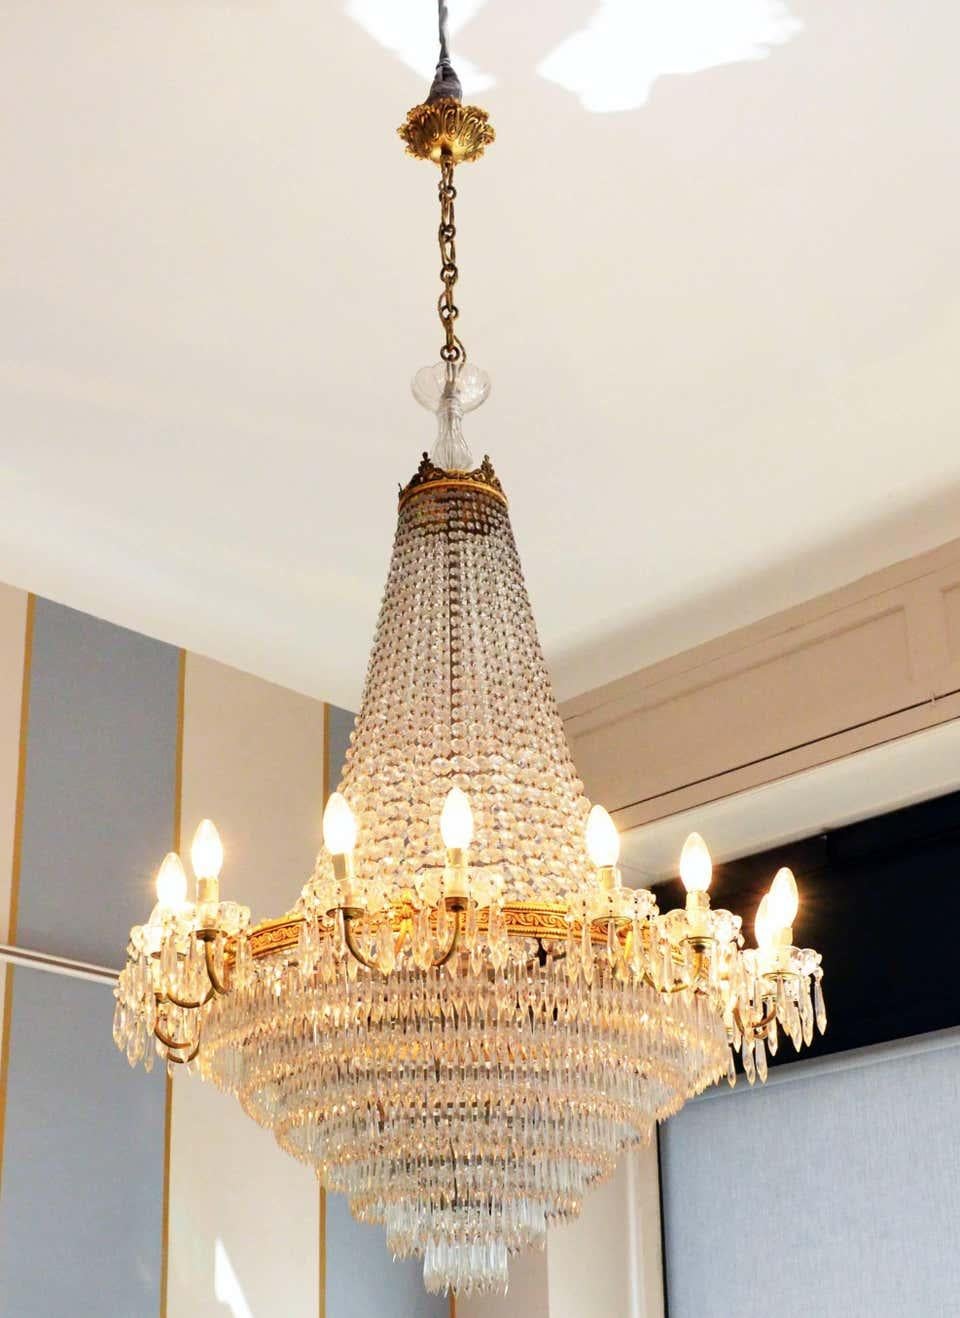 Chandelier Empire style, crystal drops and golden brass details

A crystal drops chandelier, Italy midcentury 1950s period. Golden brass detail and rings. The chandelier comes with 32-light, 16 inside and 16 outside. Newly rewired. It measures: